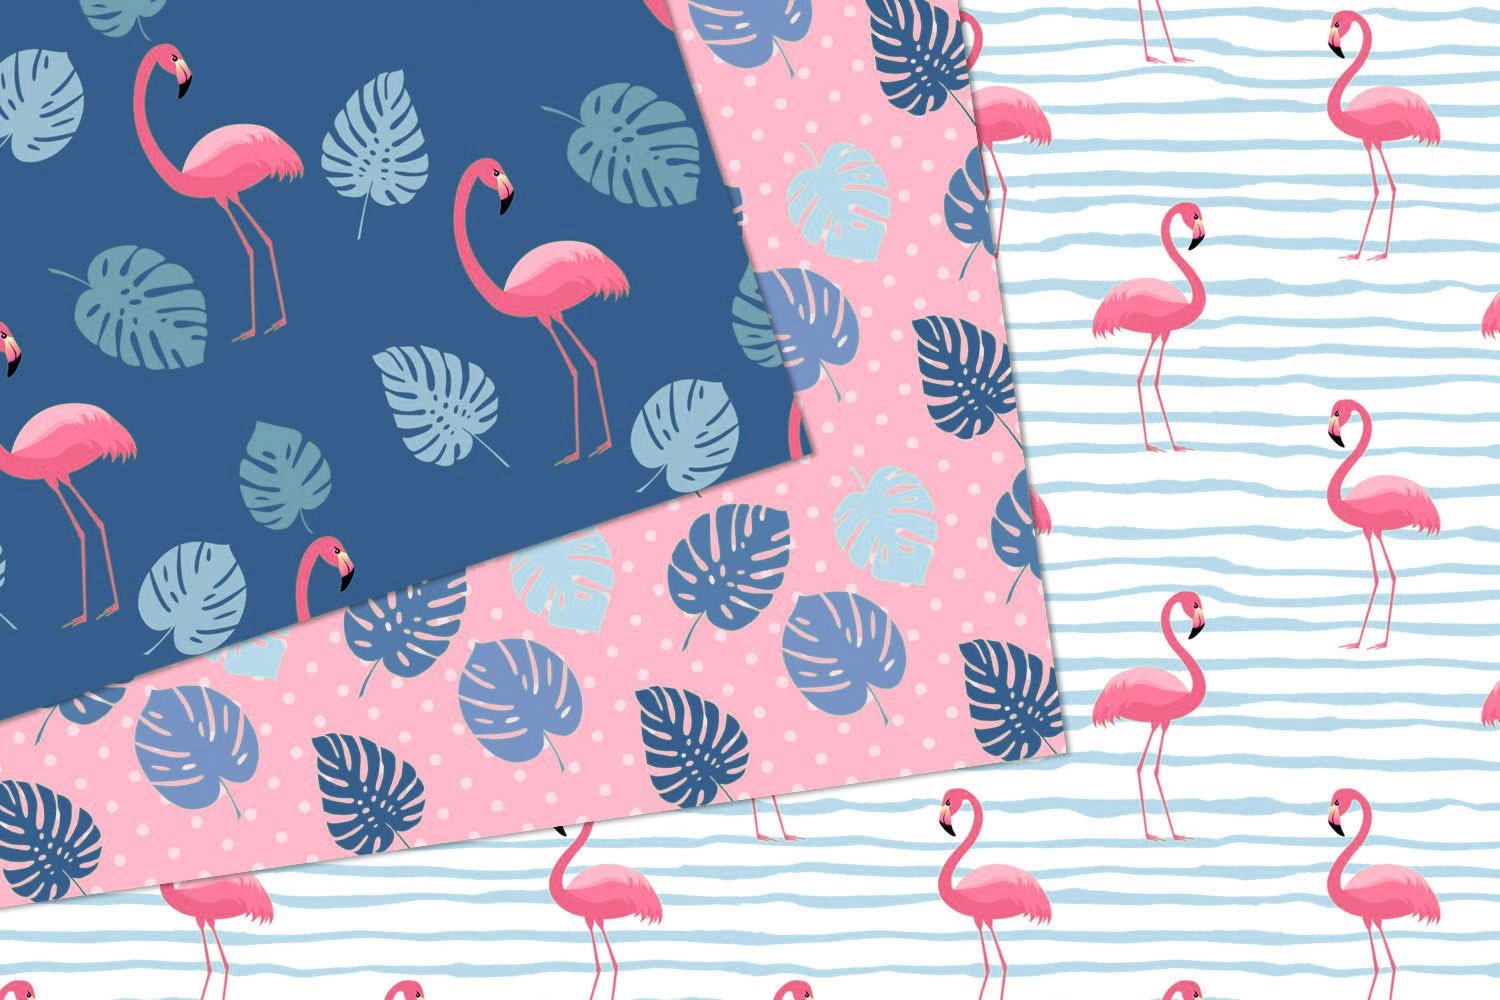 Flamingo for the stylish textures.